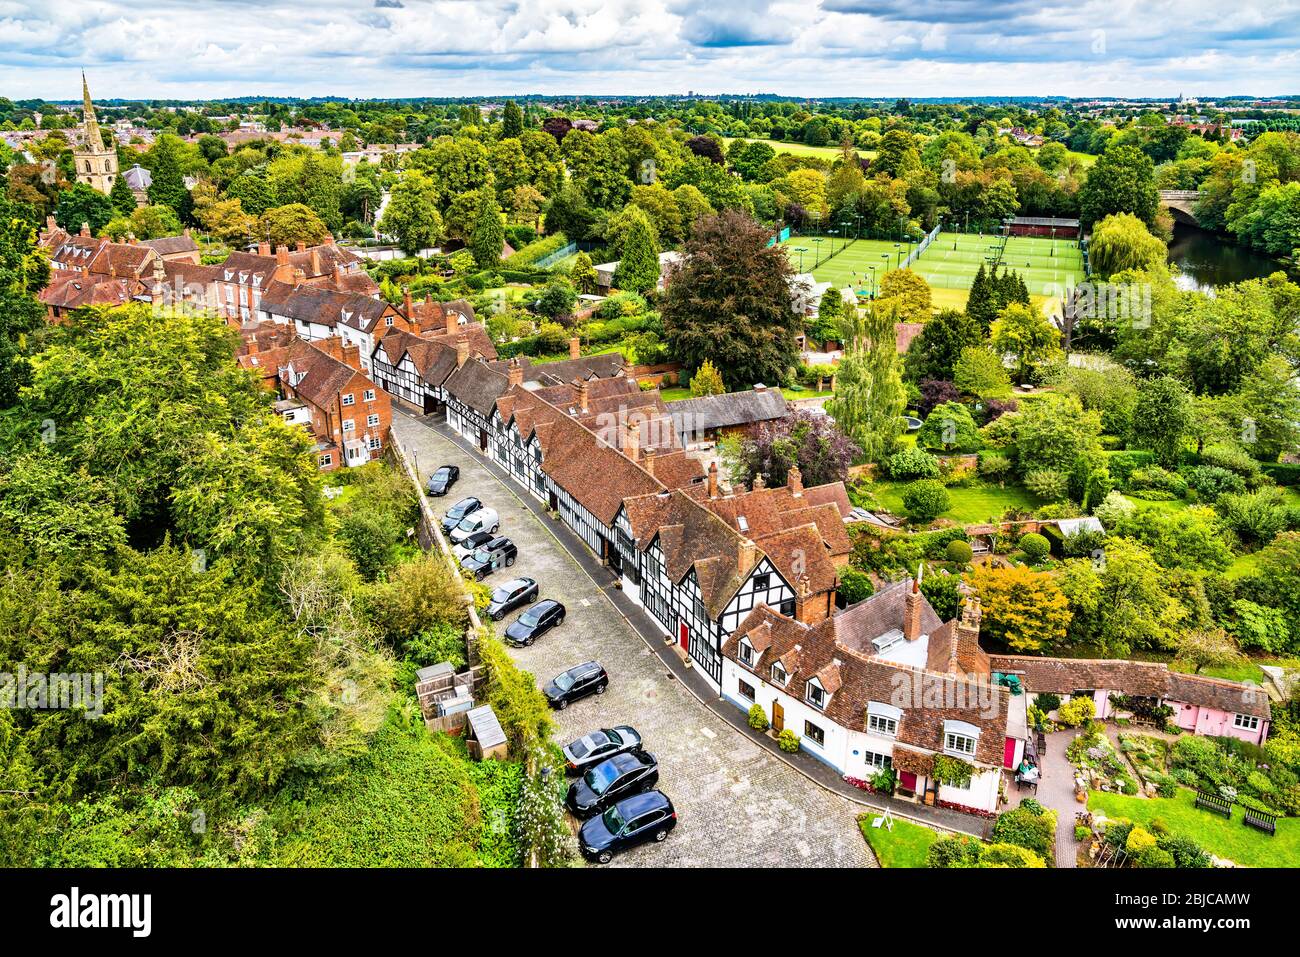 Aerial view of Warwick in England Stock Photo